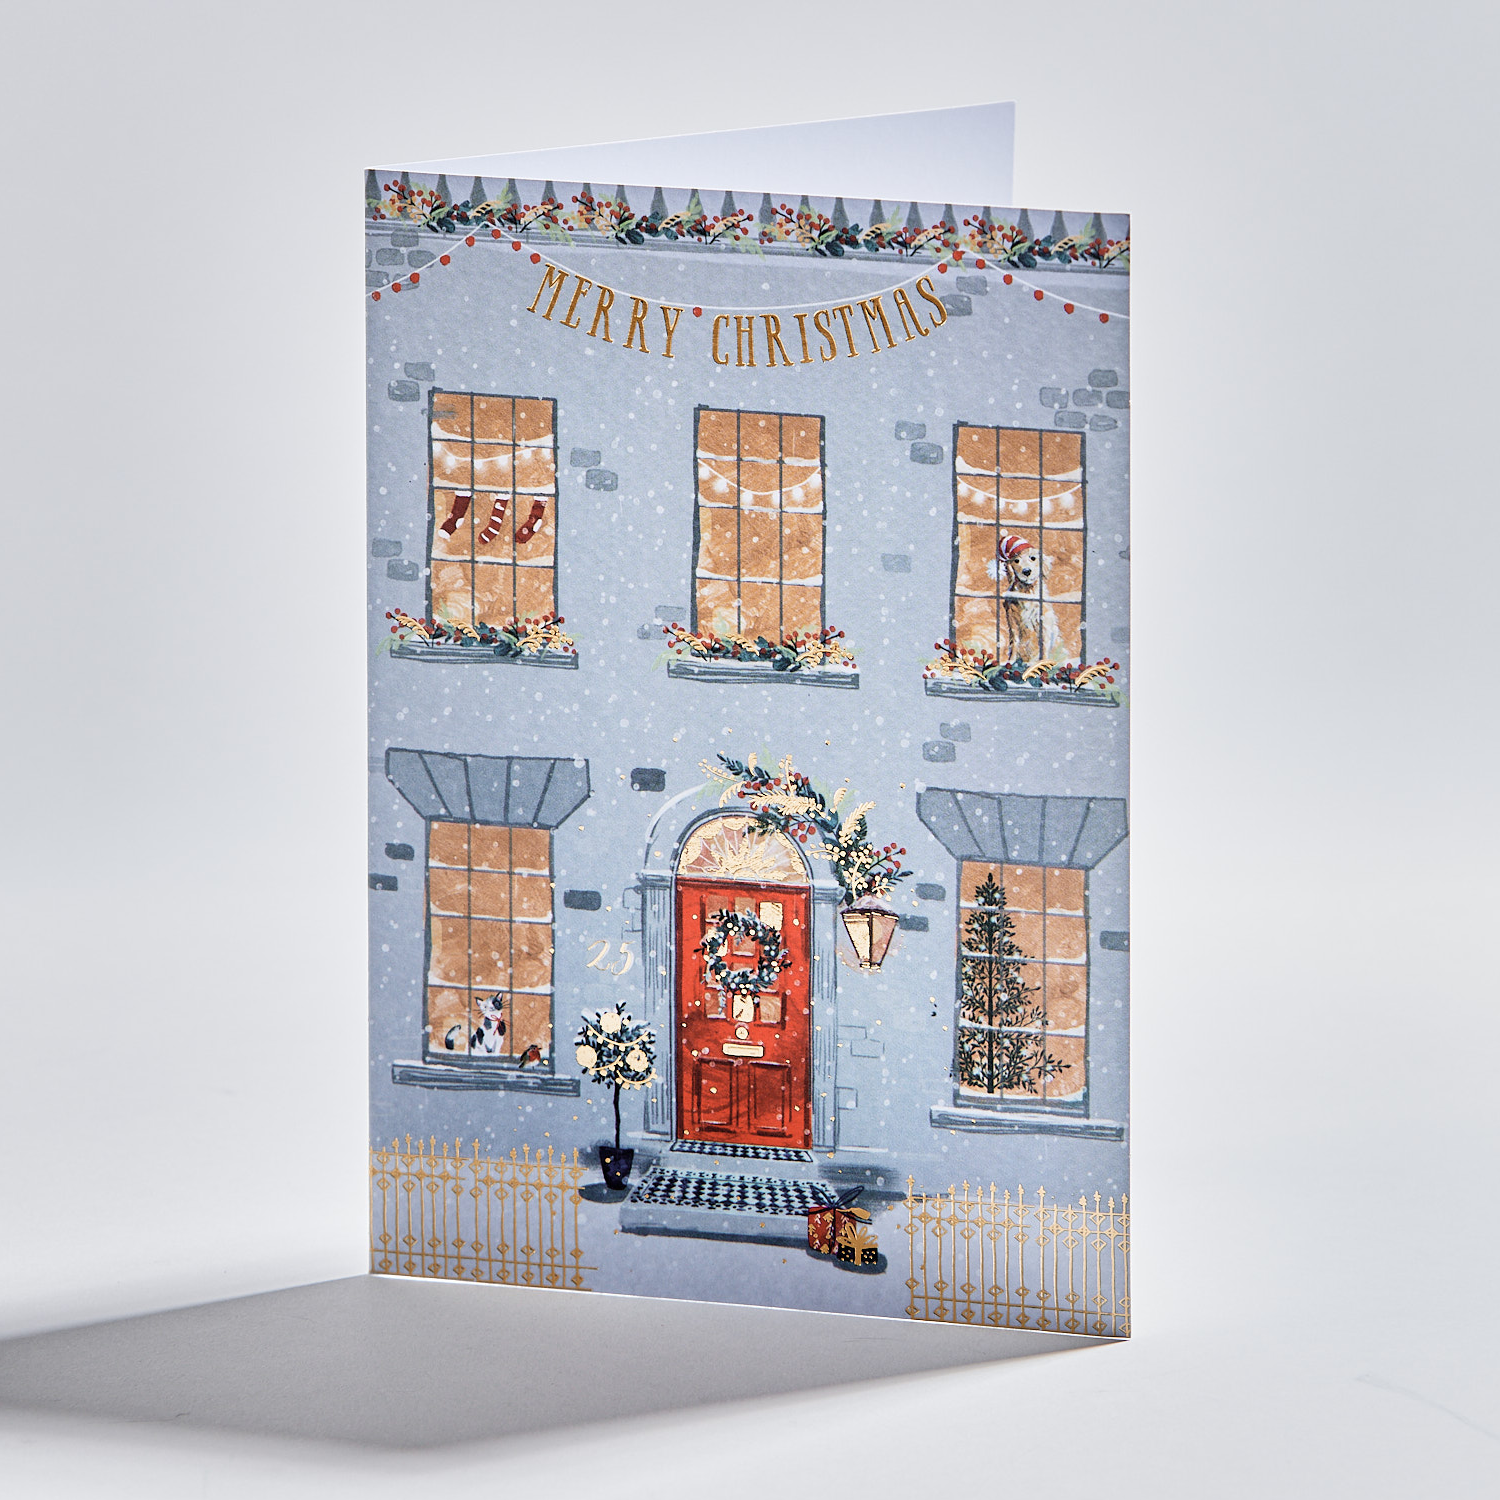 Standing christmas card depicting a townhouse with festive decorations. Text reads 'merry christmas'